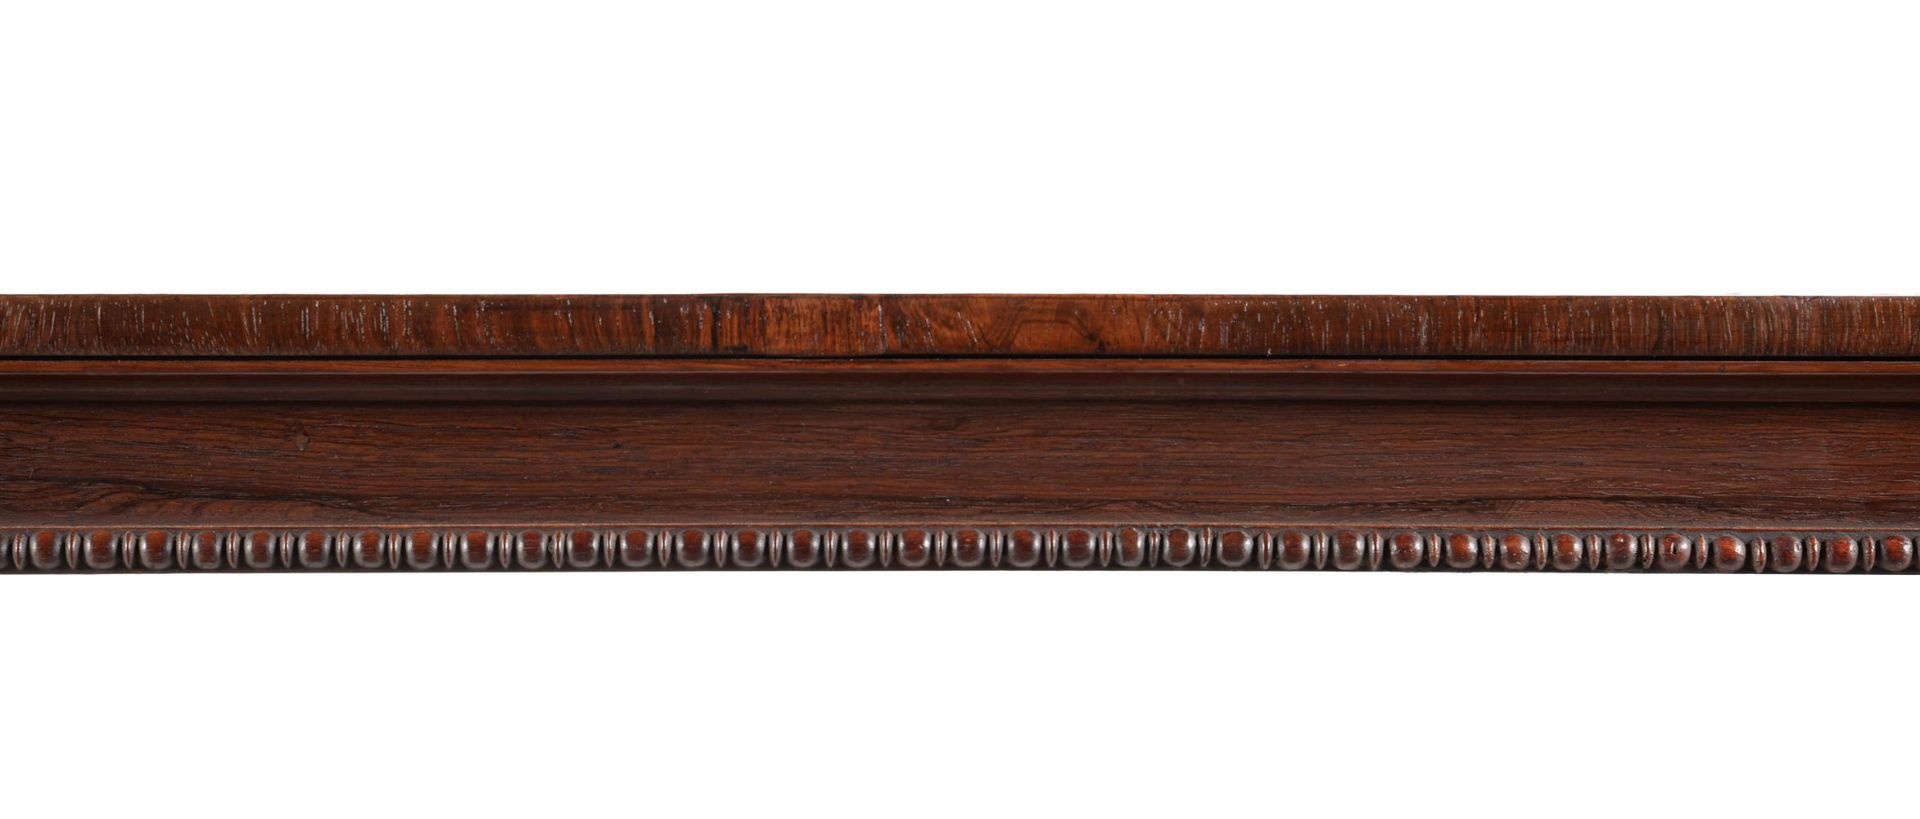 Y A REGENCY ROSEWOOD WRITING TABLE, IN THE MANNER OF GEORGE BULLOCK, CIRCA 1815 - Image 4 of 4